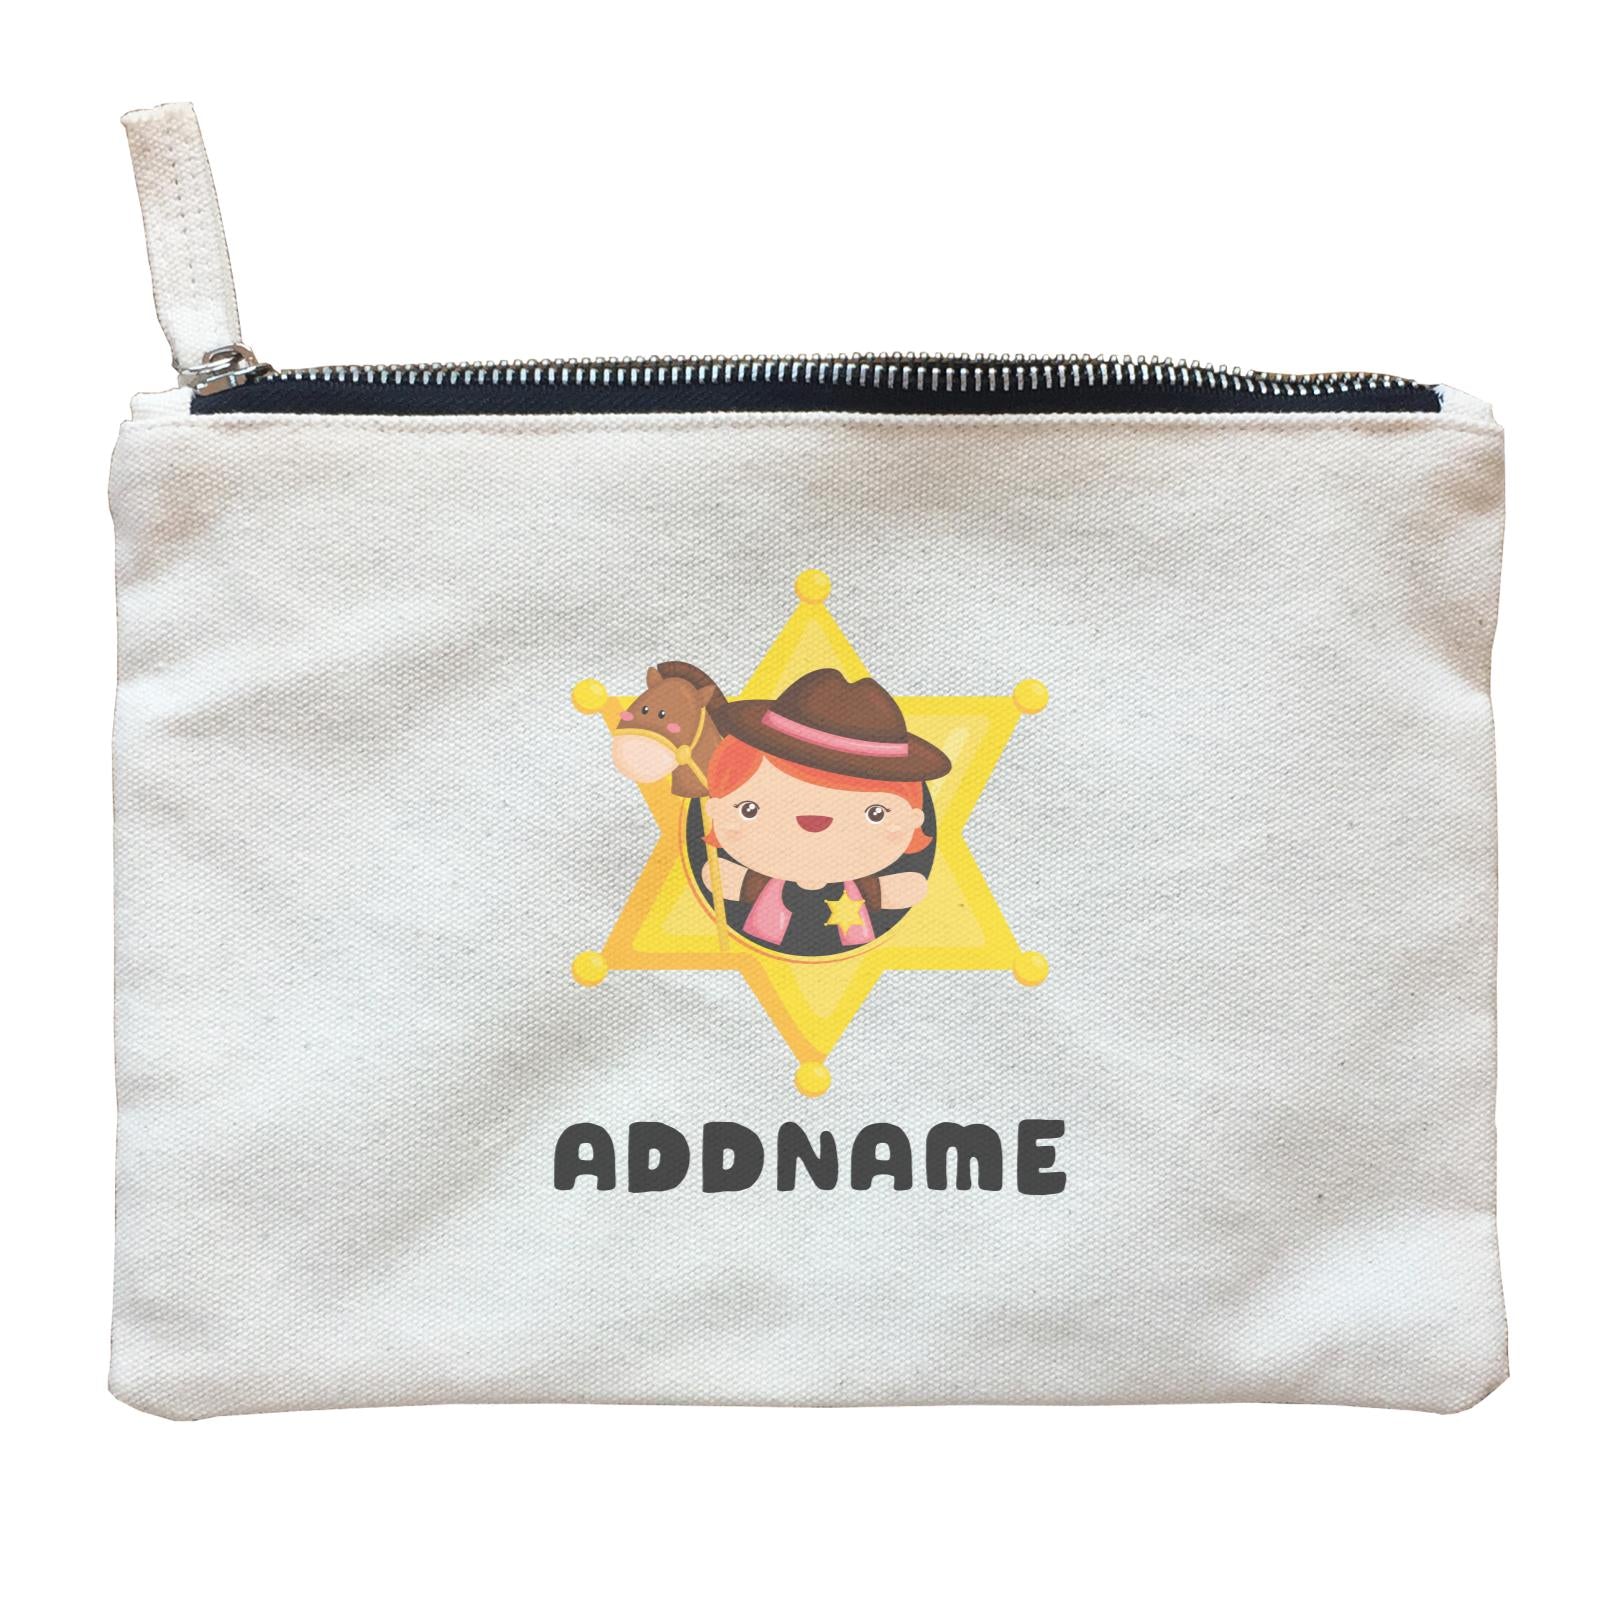 Birthday Cowboy Style Little Cowgirl Holding Toy Horse In Star Badge Addname Zipper Pouch